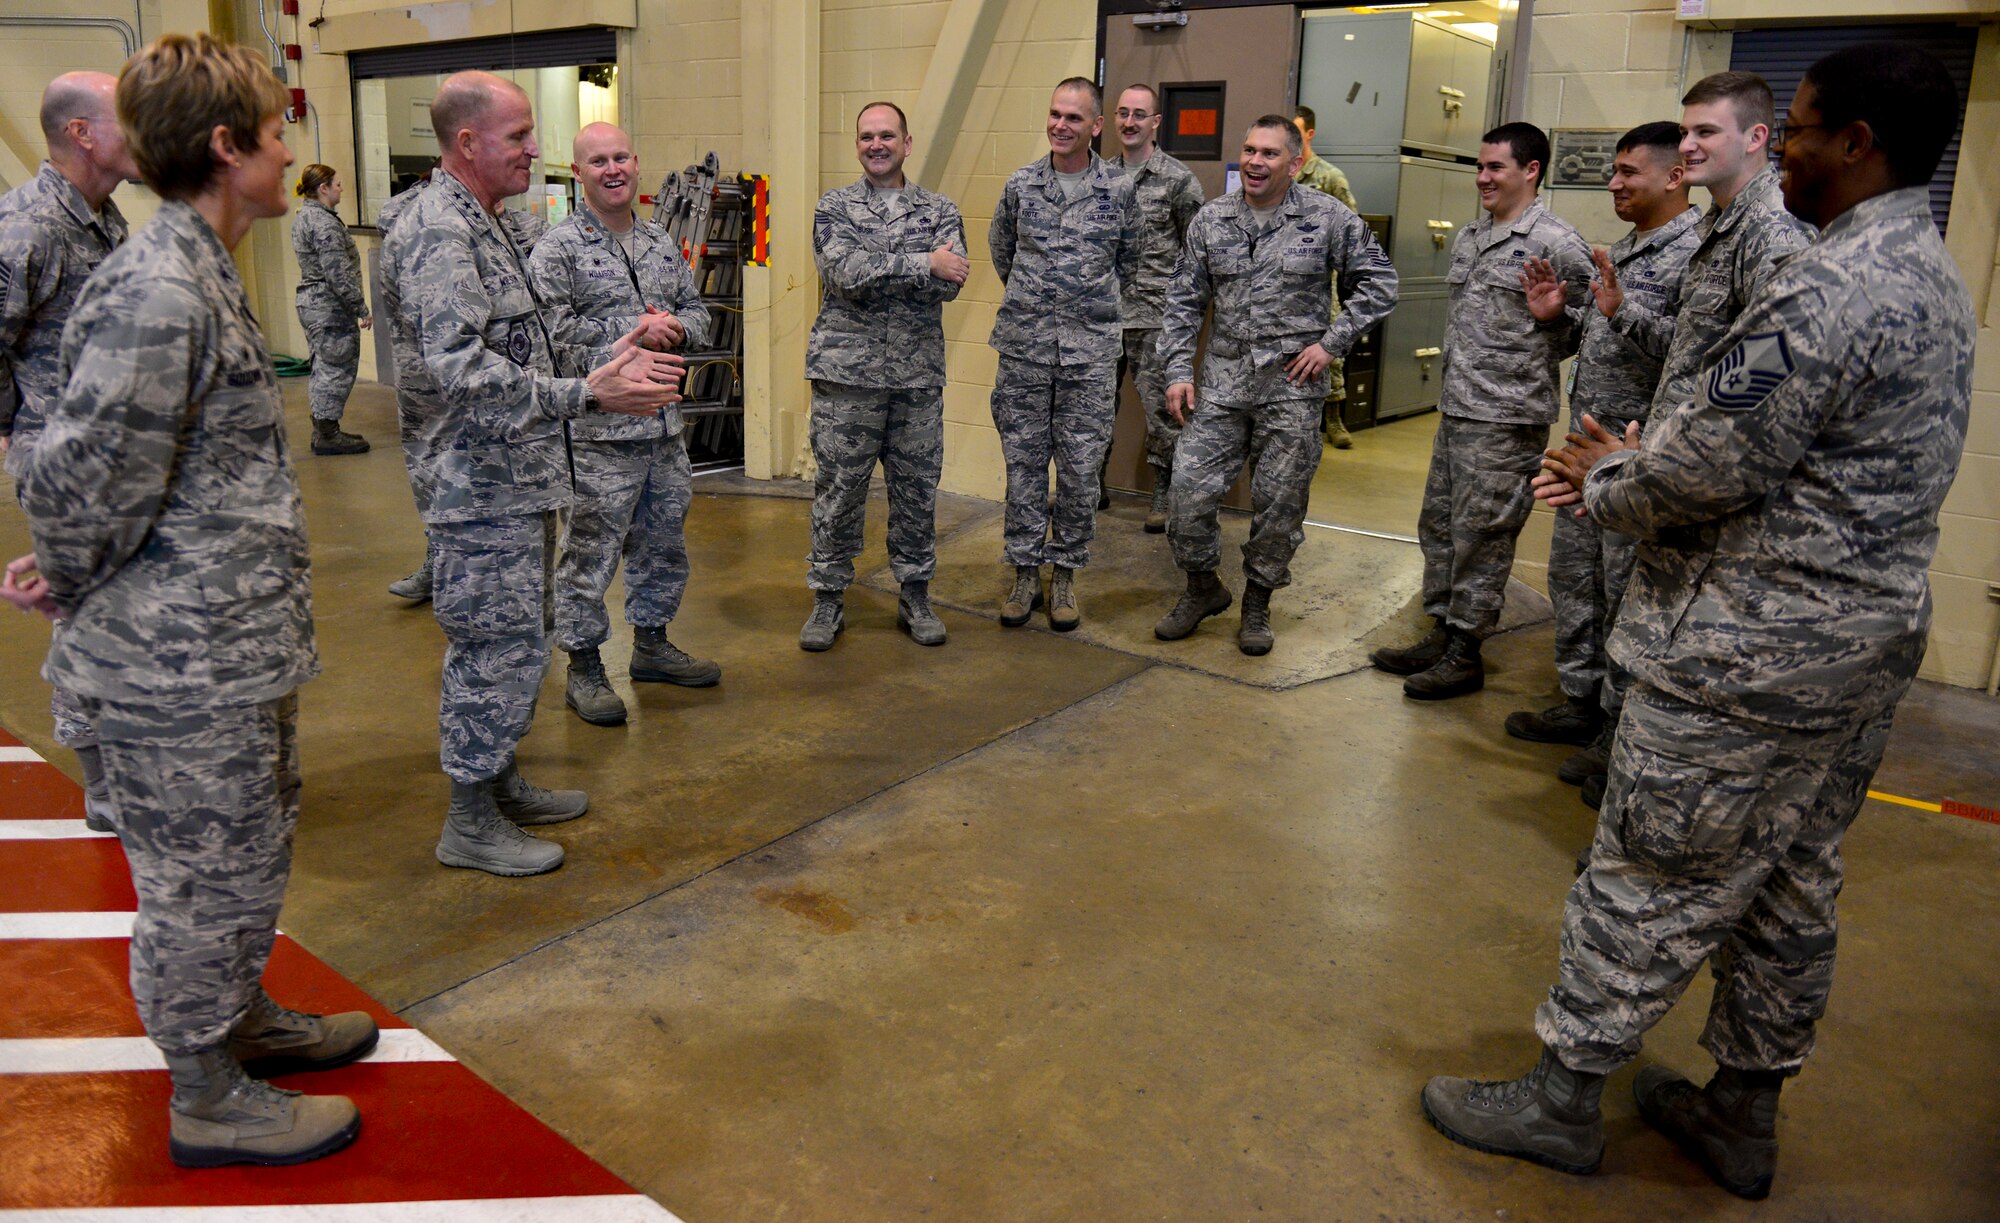 Lt. Gen. Stephen Wilson, commander of Air Force Global Strike Command, speaks with Airmen from the 2nd Maintenance Squadron phase hangar on Barksdale Air Force Base, La., Dec. 16, 2014. Wilson toured the facility and was briefed by different Airmen on their functions and responsibilities.(U.S. Air Force photo/Airman 1st Class Mozer O. Da Cunha) 